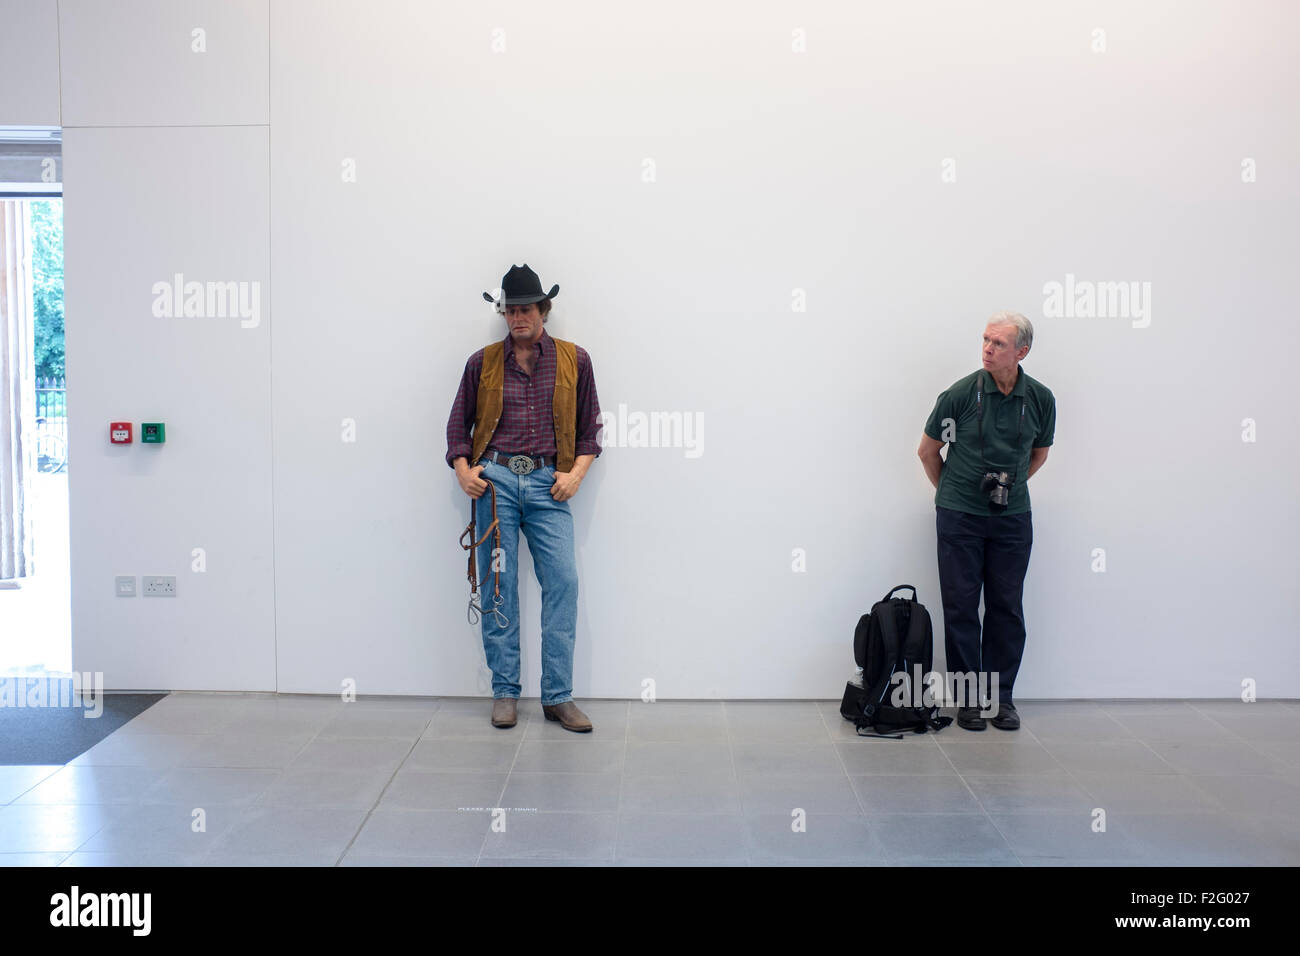 Duane Hanson (1925-1996) in his first survey show in London since 1997. Throughout his forty-year career, Hanson created lifelike sculptures portraying working-class Americans and overlooked members of society. Reminiscent of the Pop Art movement of the time, his sculptures transform the banalities and trivialities of everyday life into iconographic material. Stock Photo